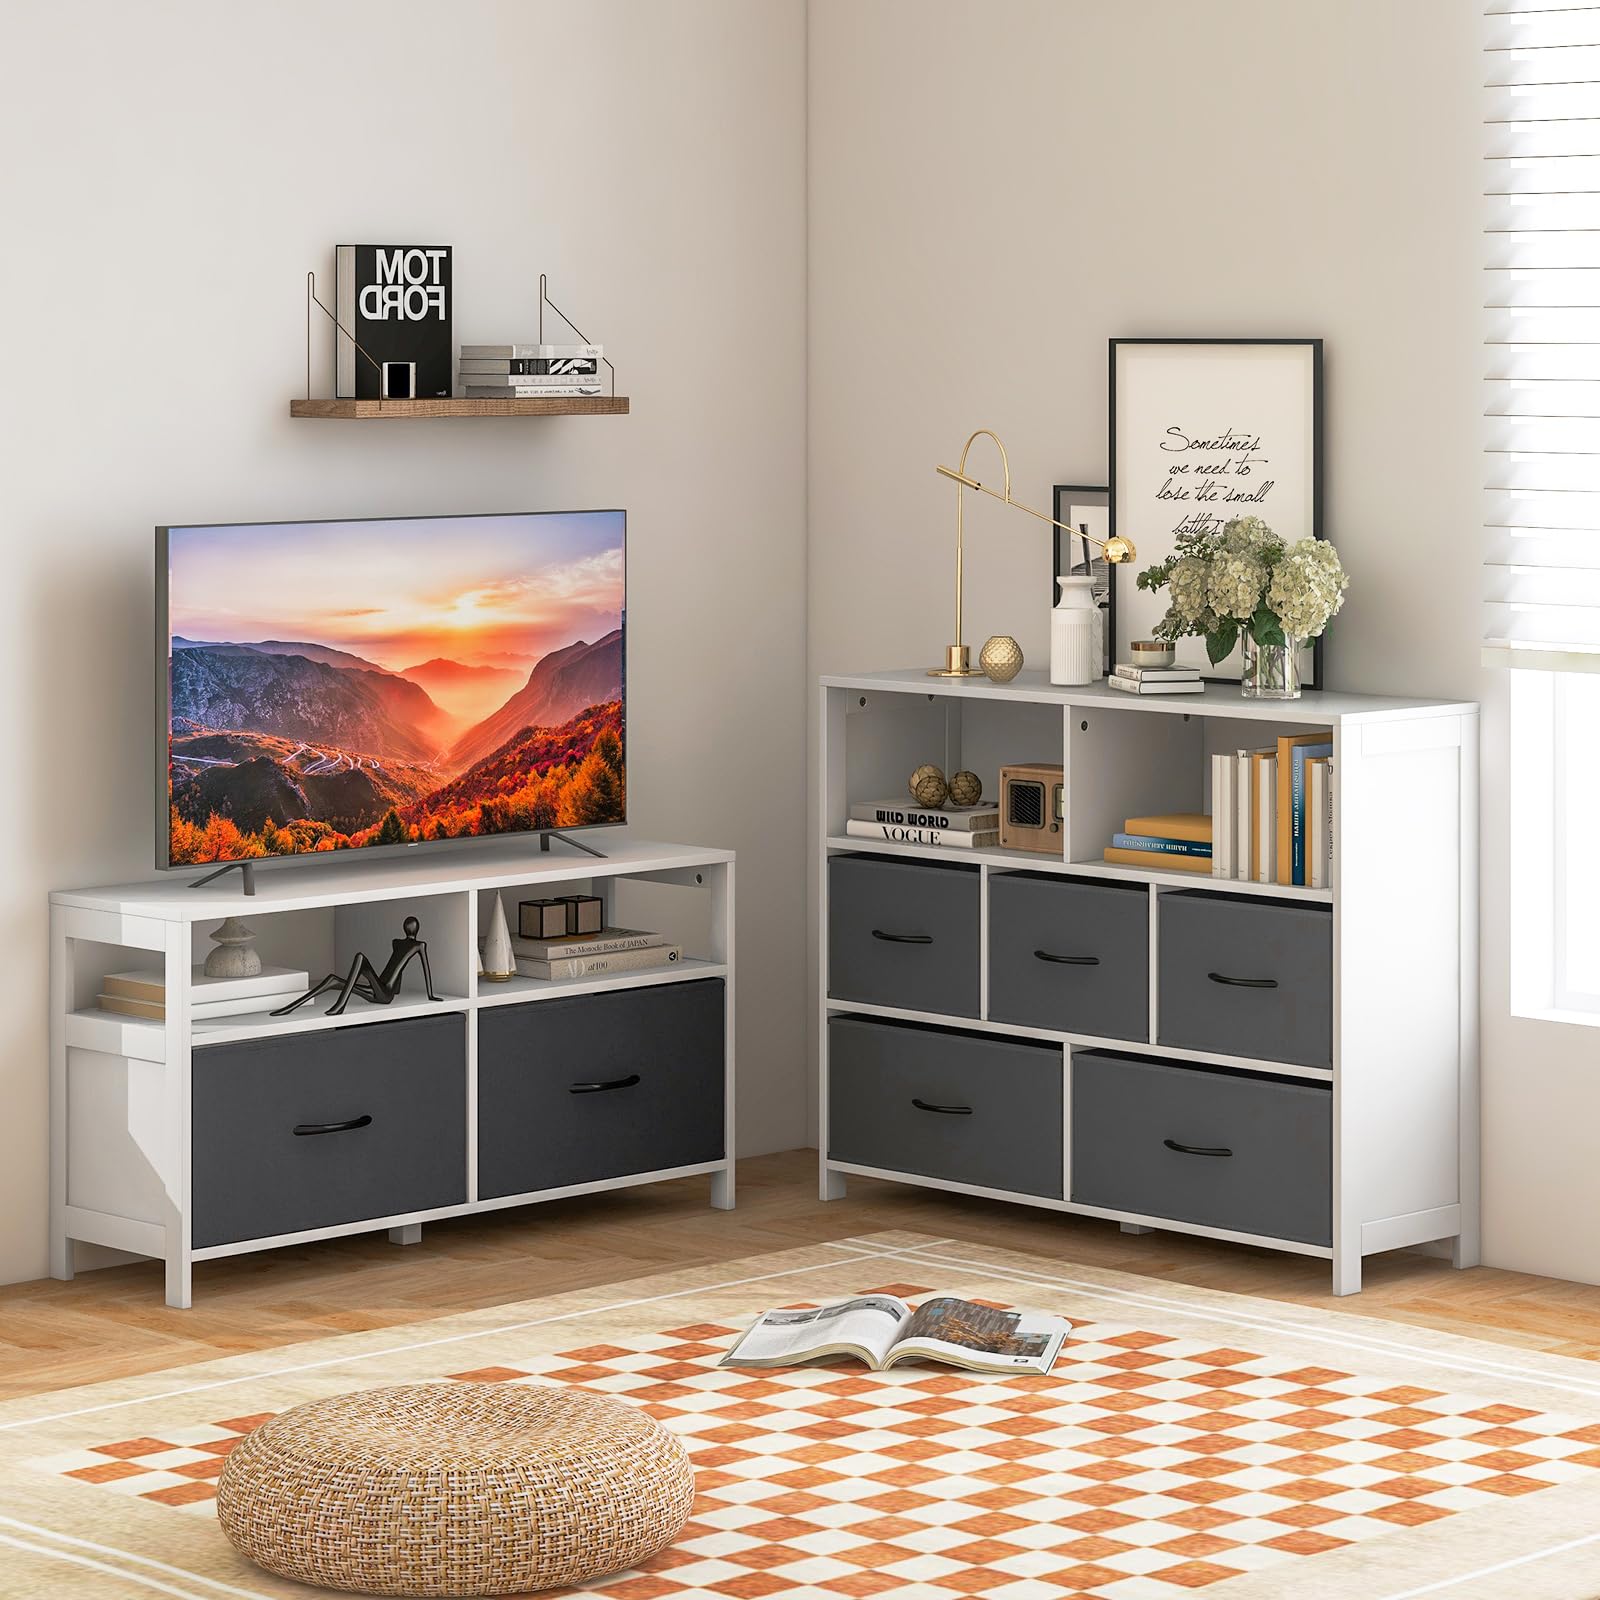 Giantex TV Stand for Bedroom, Storage Cabinet with 2 Open Shelves, 2 Removable Fabric Drawers